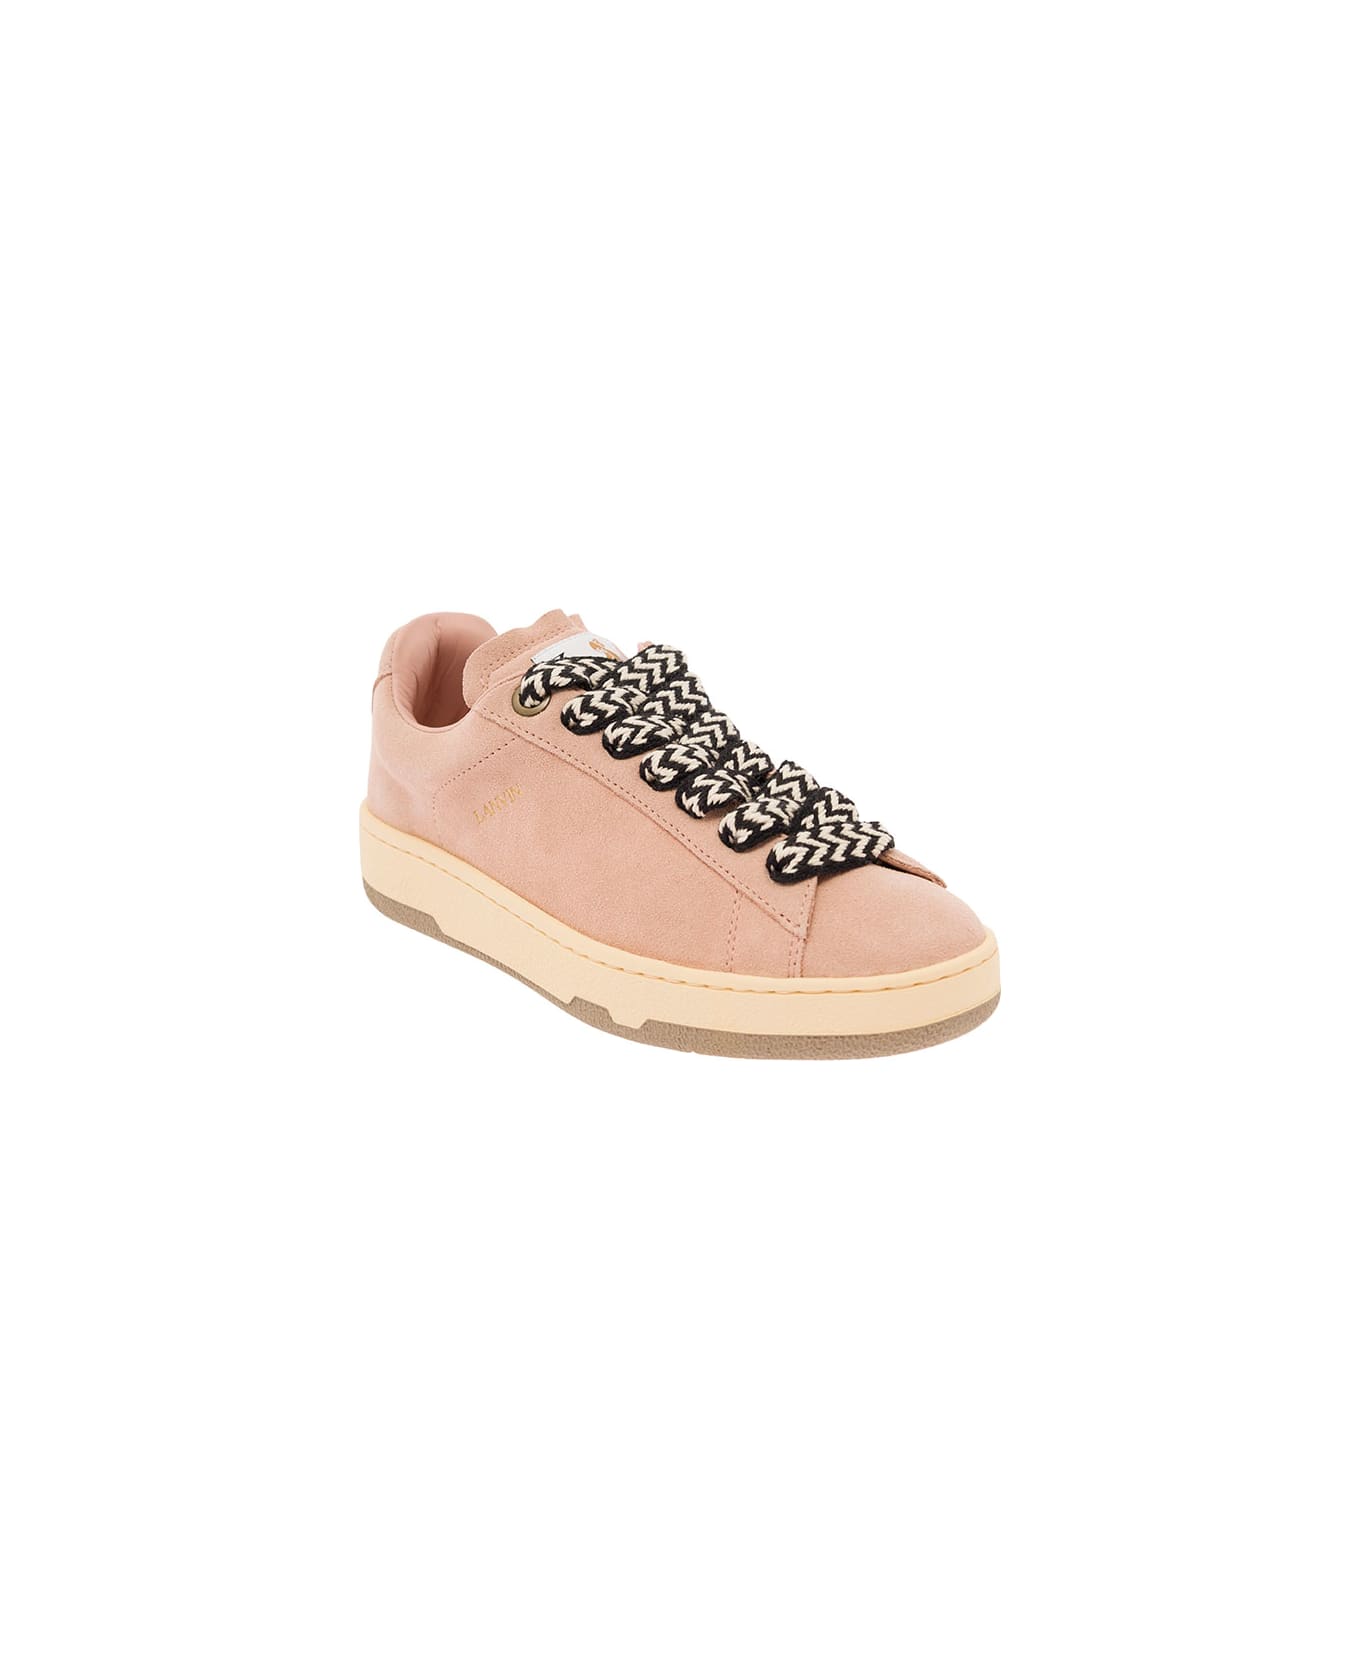 Lanvin 'lite Curb' Pink Low Top Sneakers With Oversized Multicolor Laces In Suede Woman - Pink スニーカー